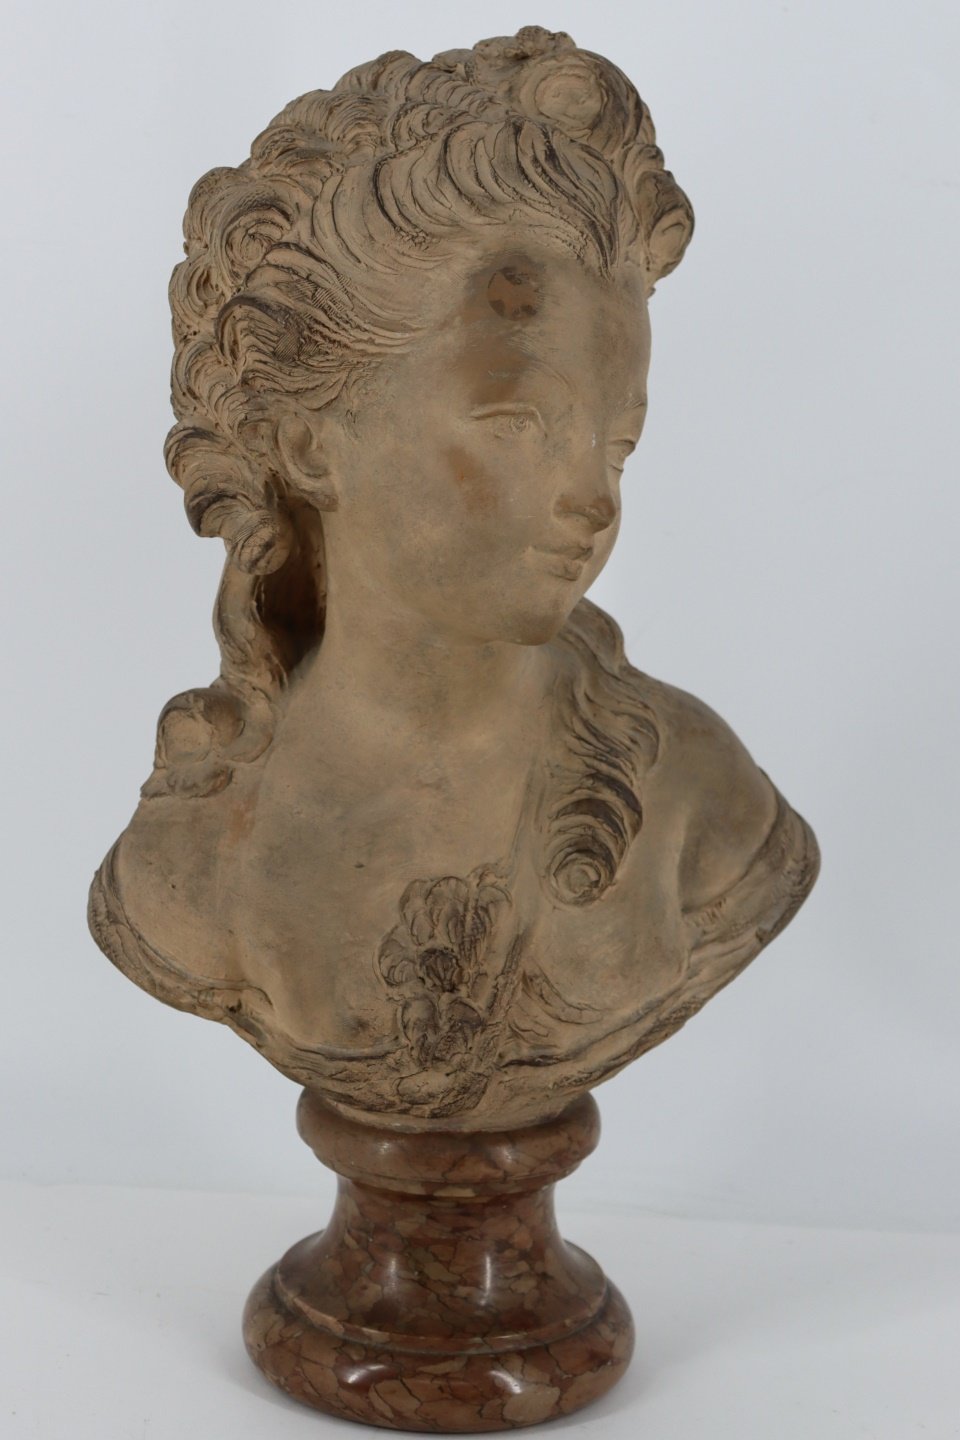 ANTIQUE FRENCH TERRACOTTA BUST